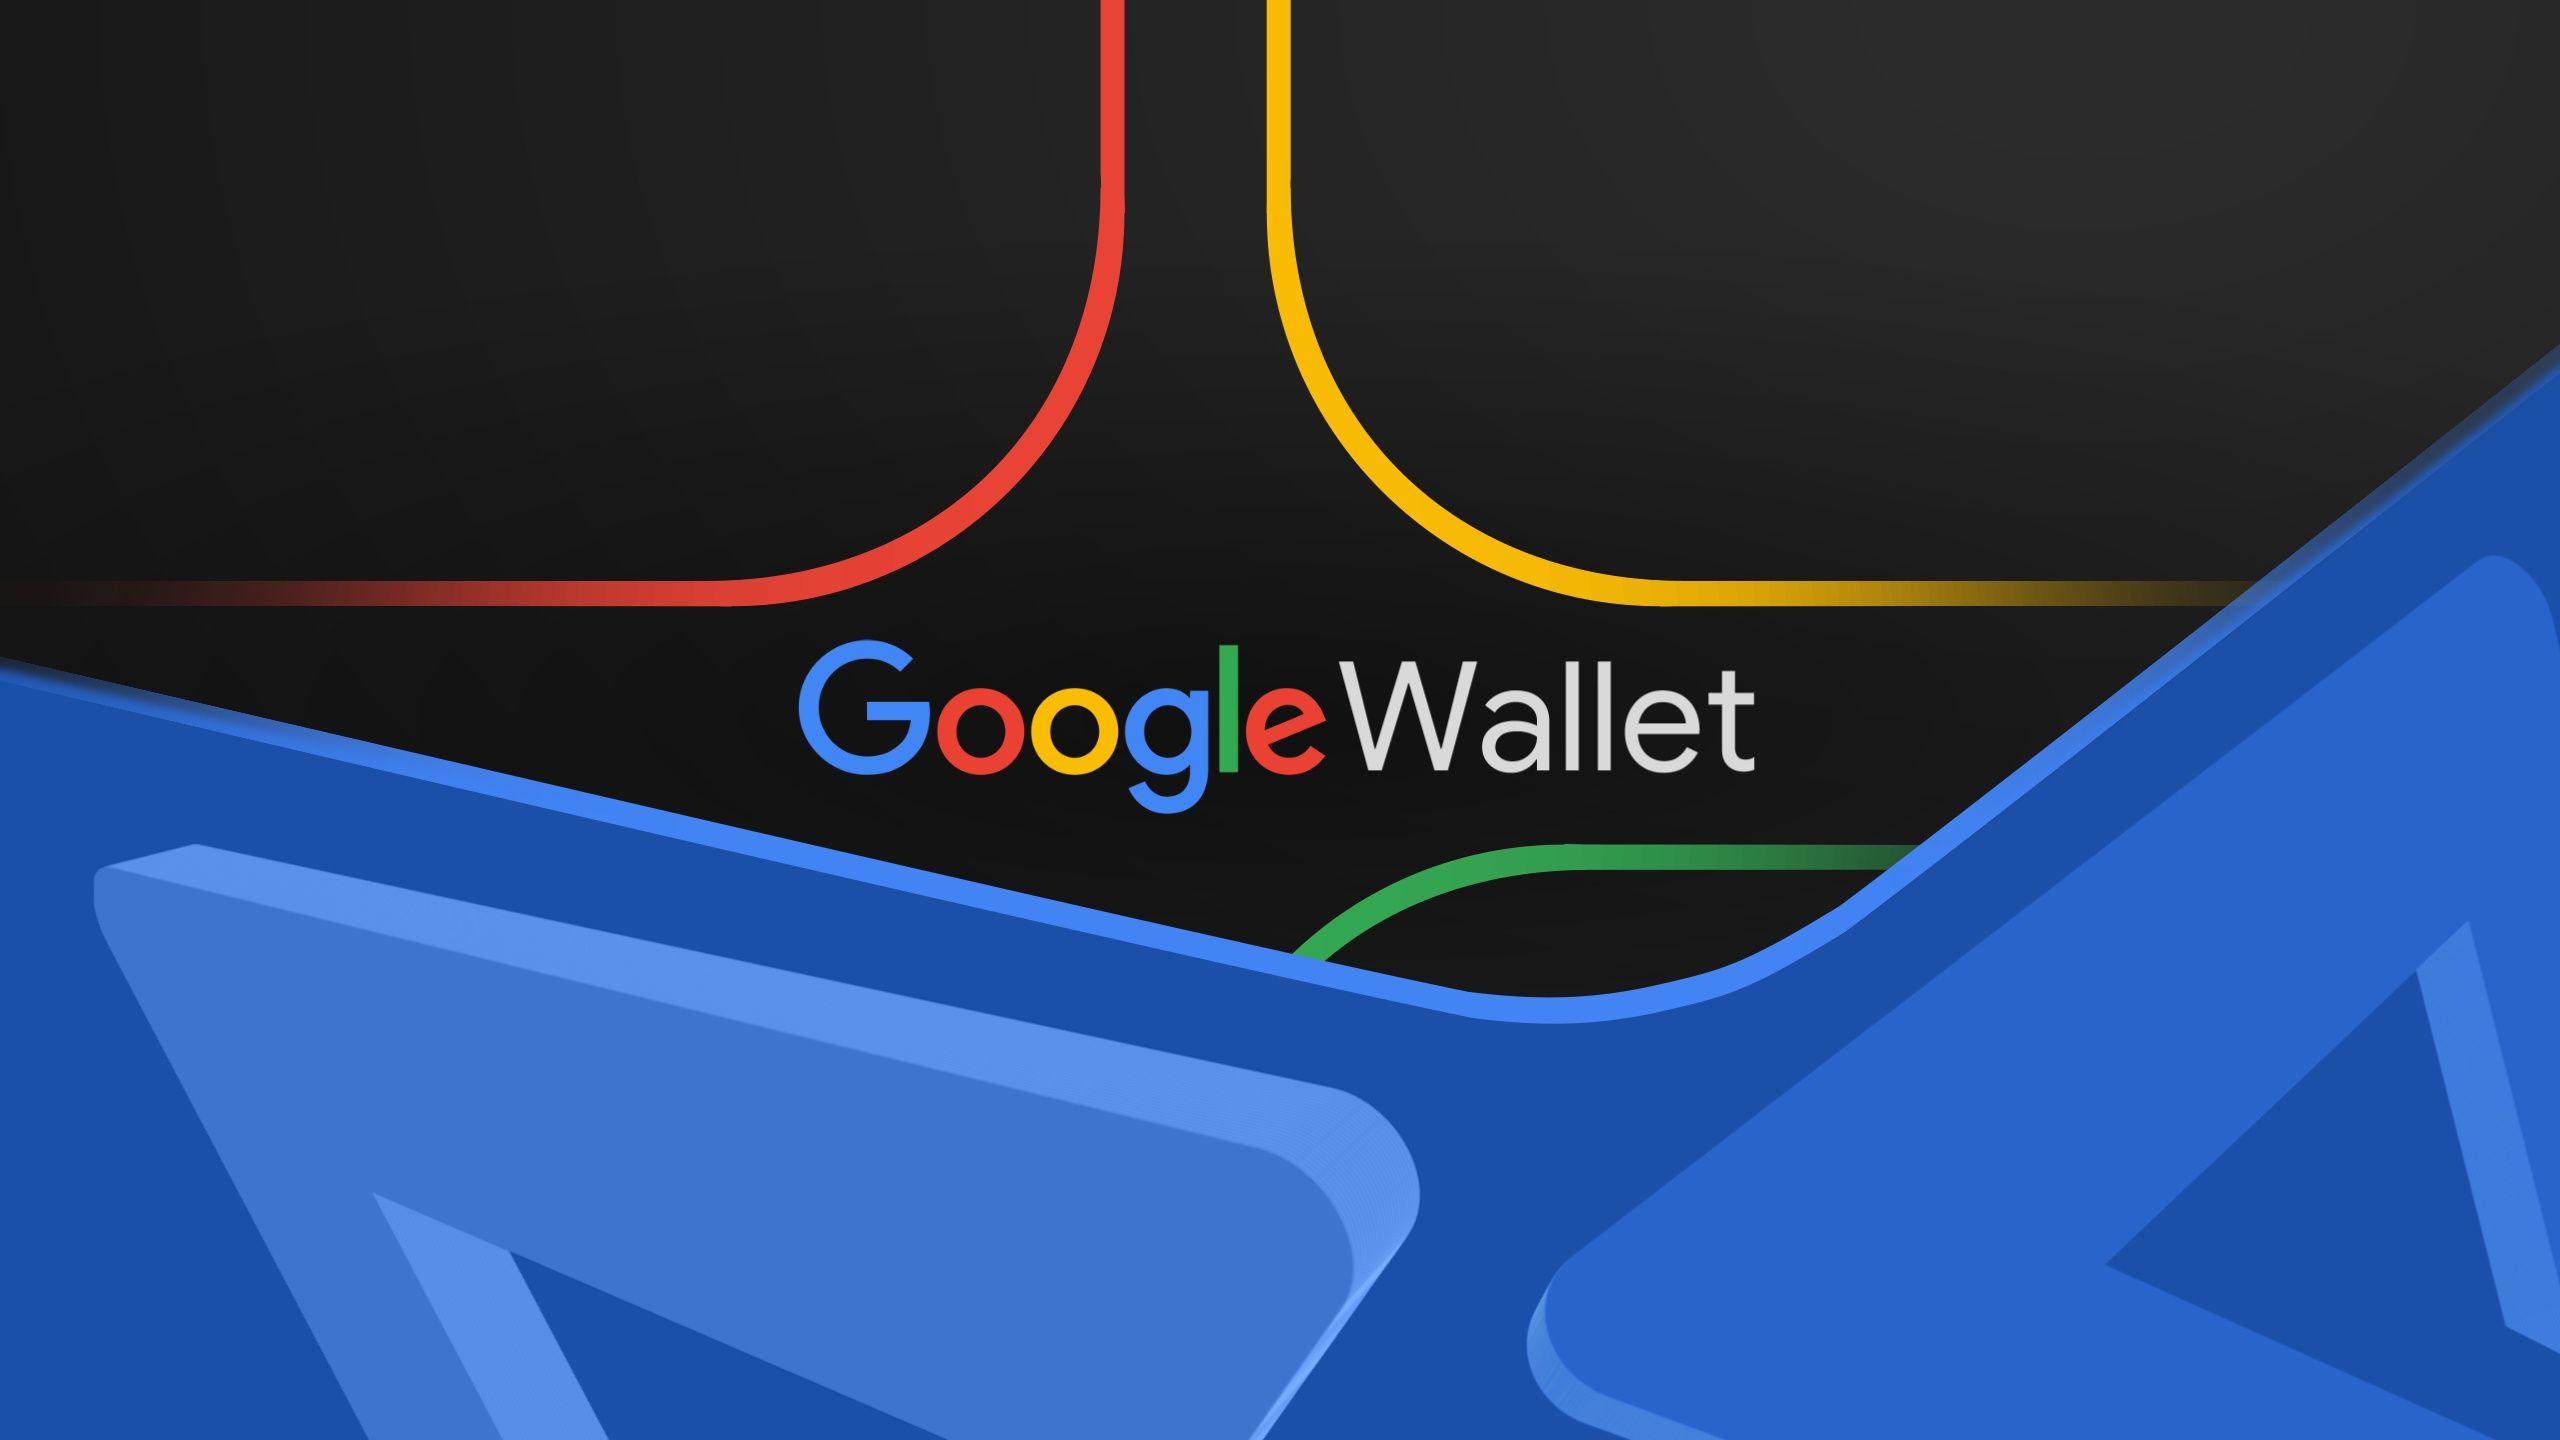 The words 'Google Wallet' against a black background with multi-color objects surrouding the words